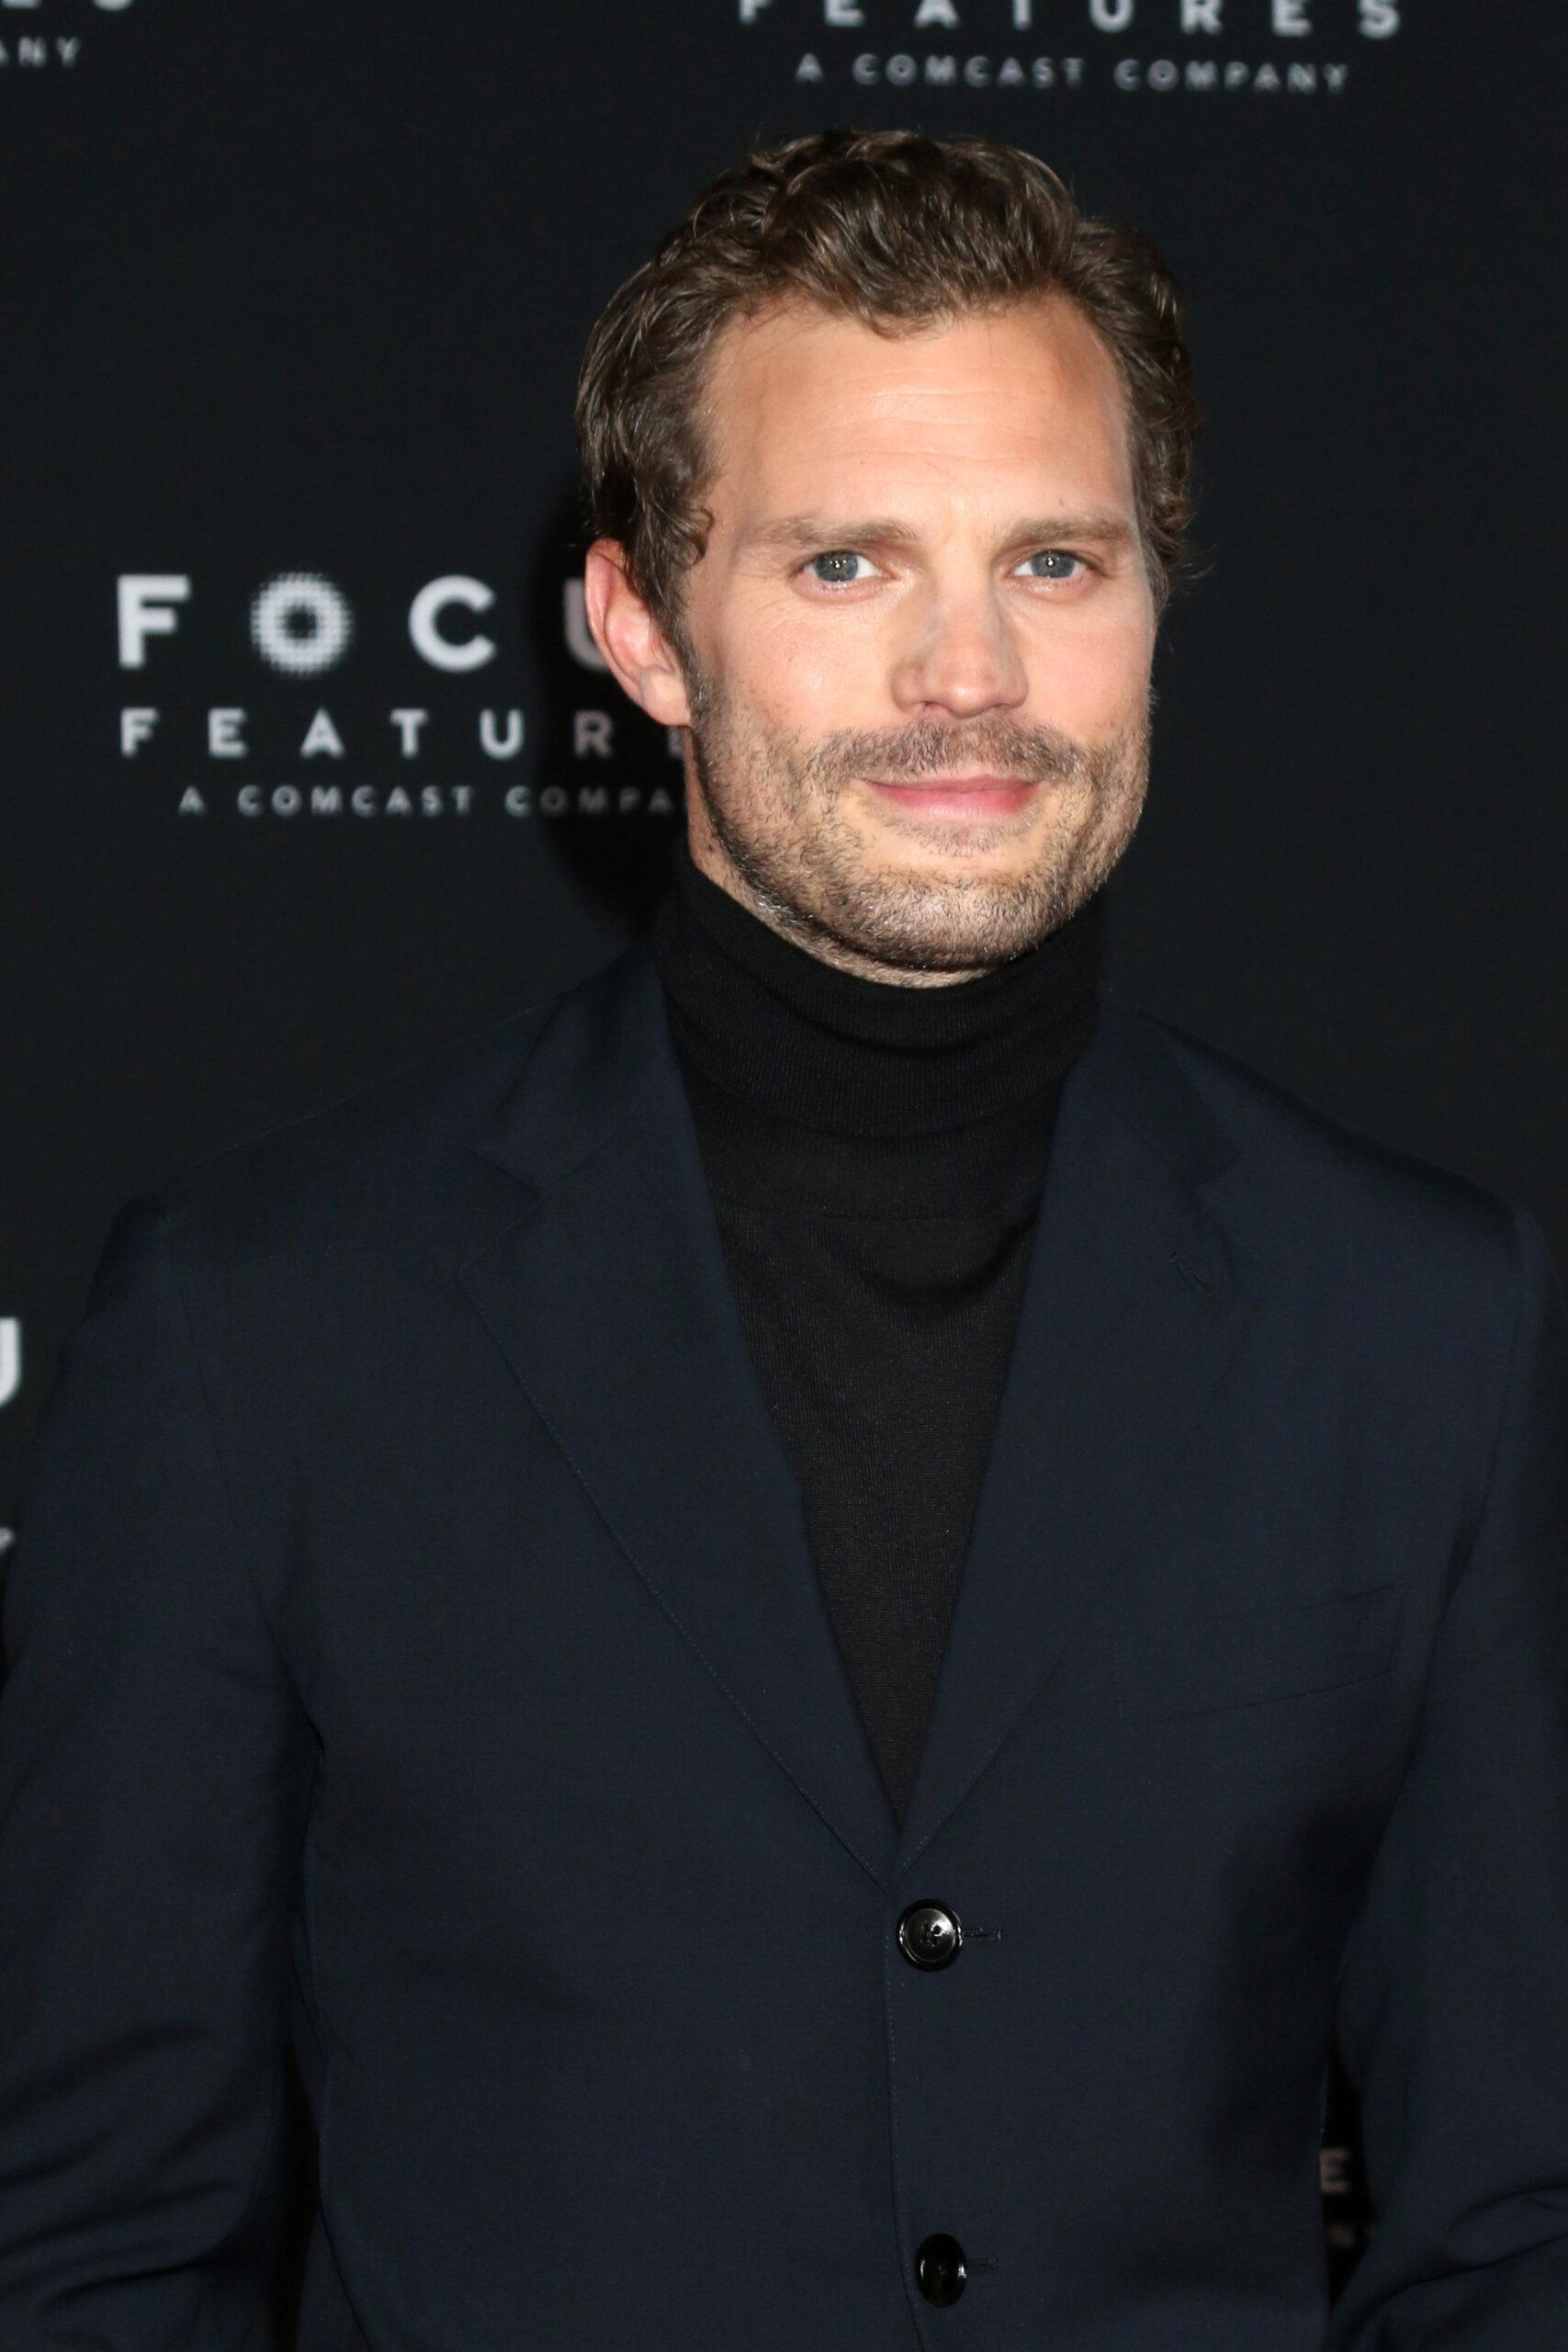 'Fifty Shades Of Grey:' How The Movie Affected Jamie Dornan's Career